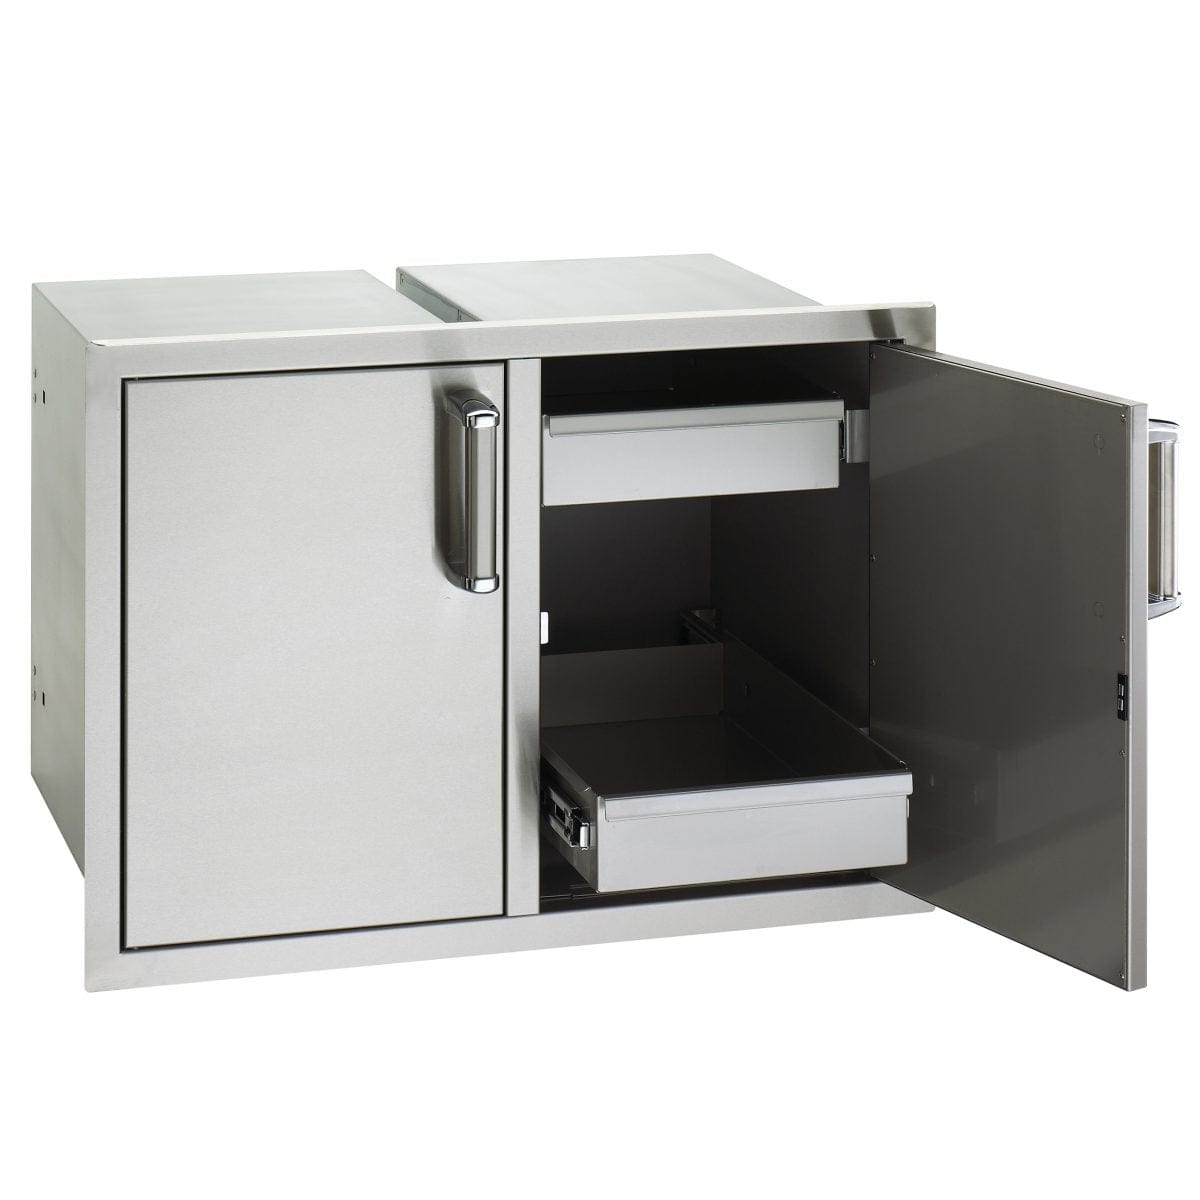 Fire Magic Flush Double Doors with Dual Drawers - Kitchen King Direct